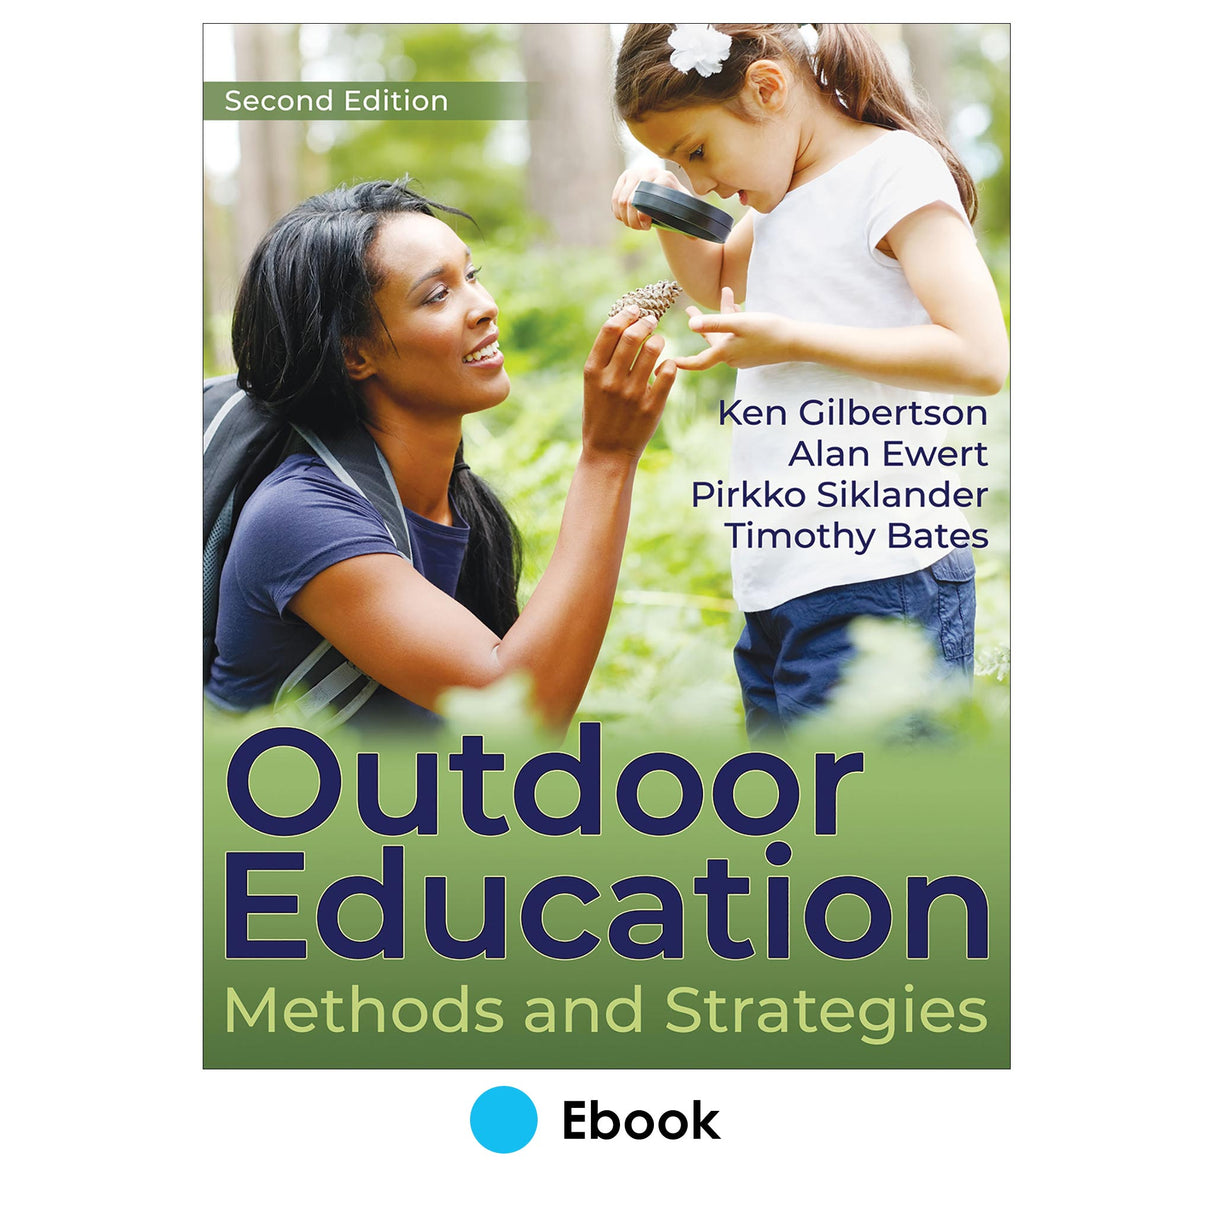 Outdoor Education 2nd Edition epub